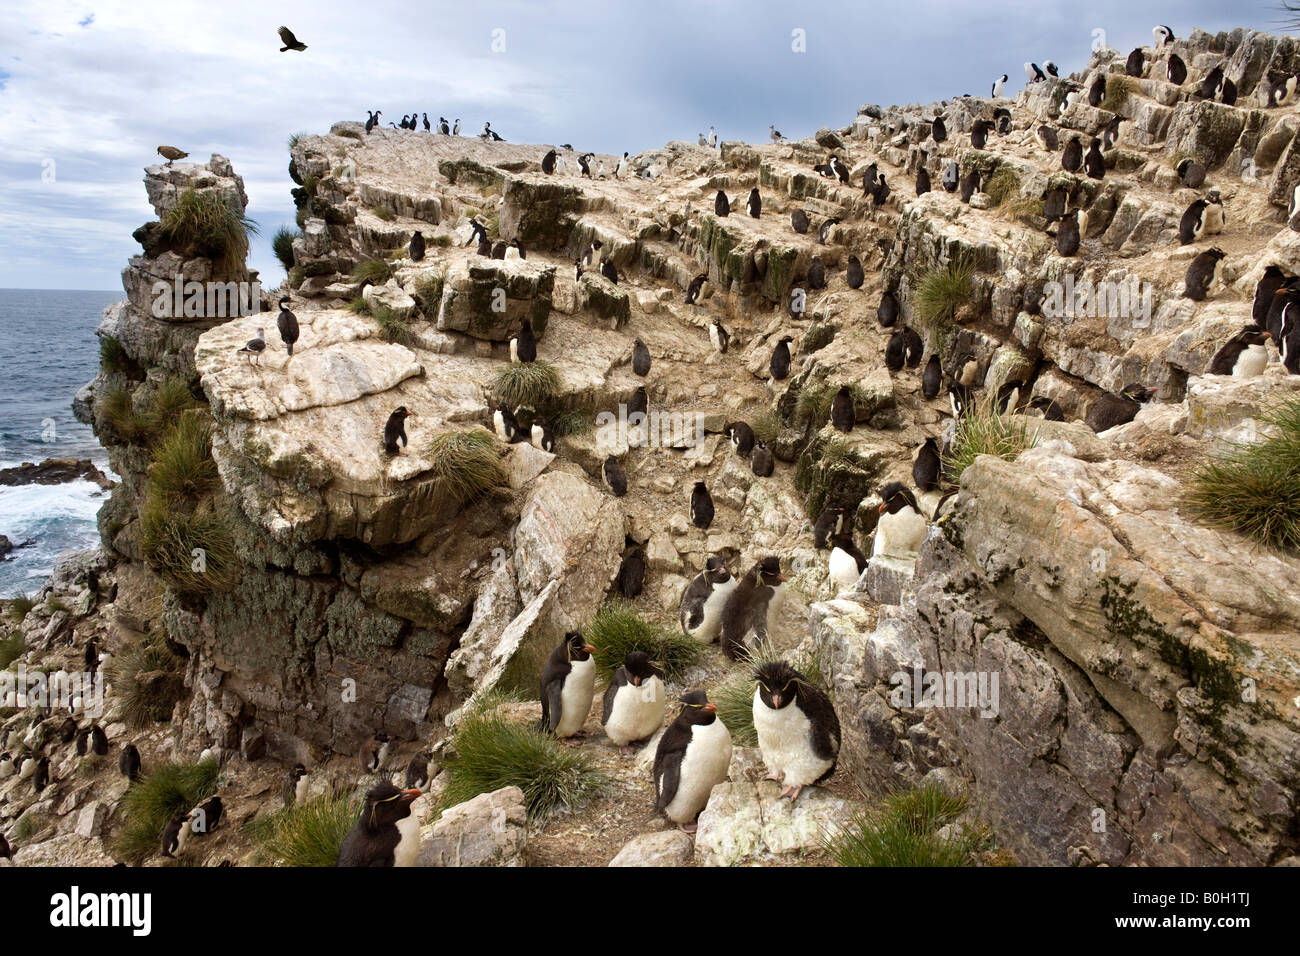 Rockhopper Penguin colony - Eudyptes Chrysocome - on Pebble Island in West Falkland in The Falkland Islands Stock Photo